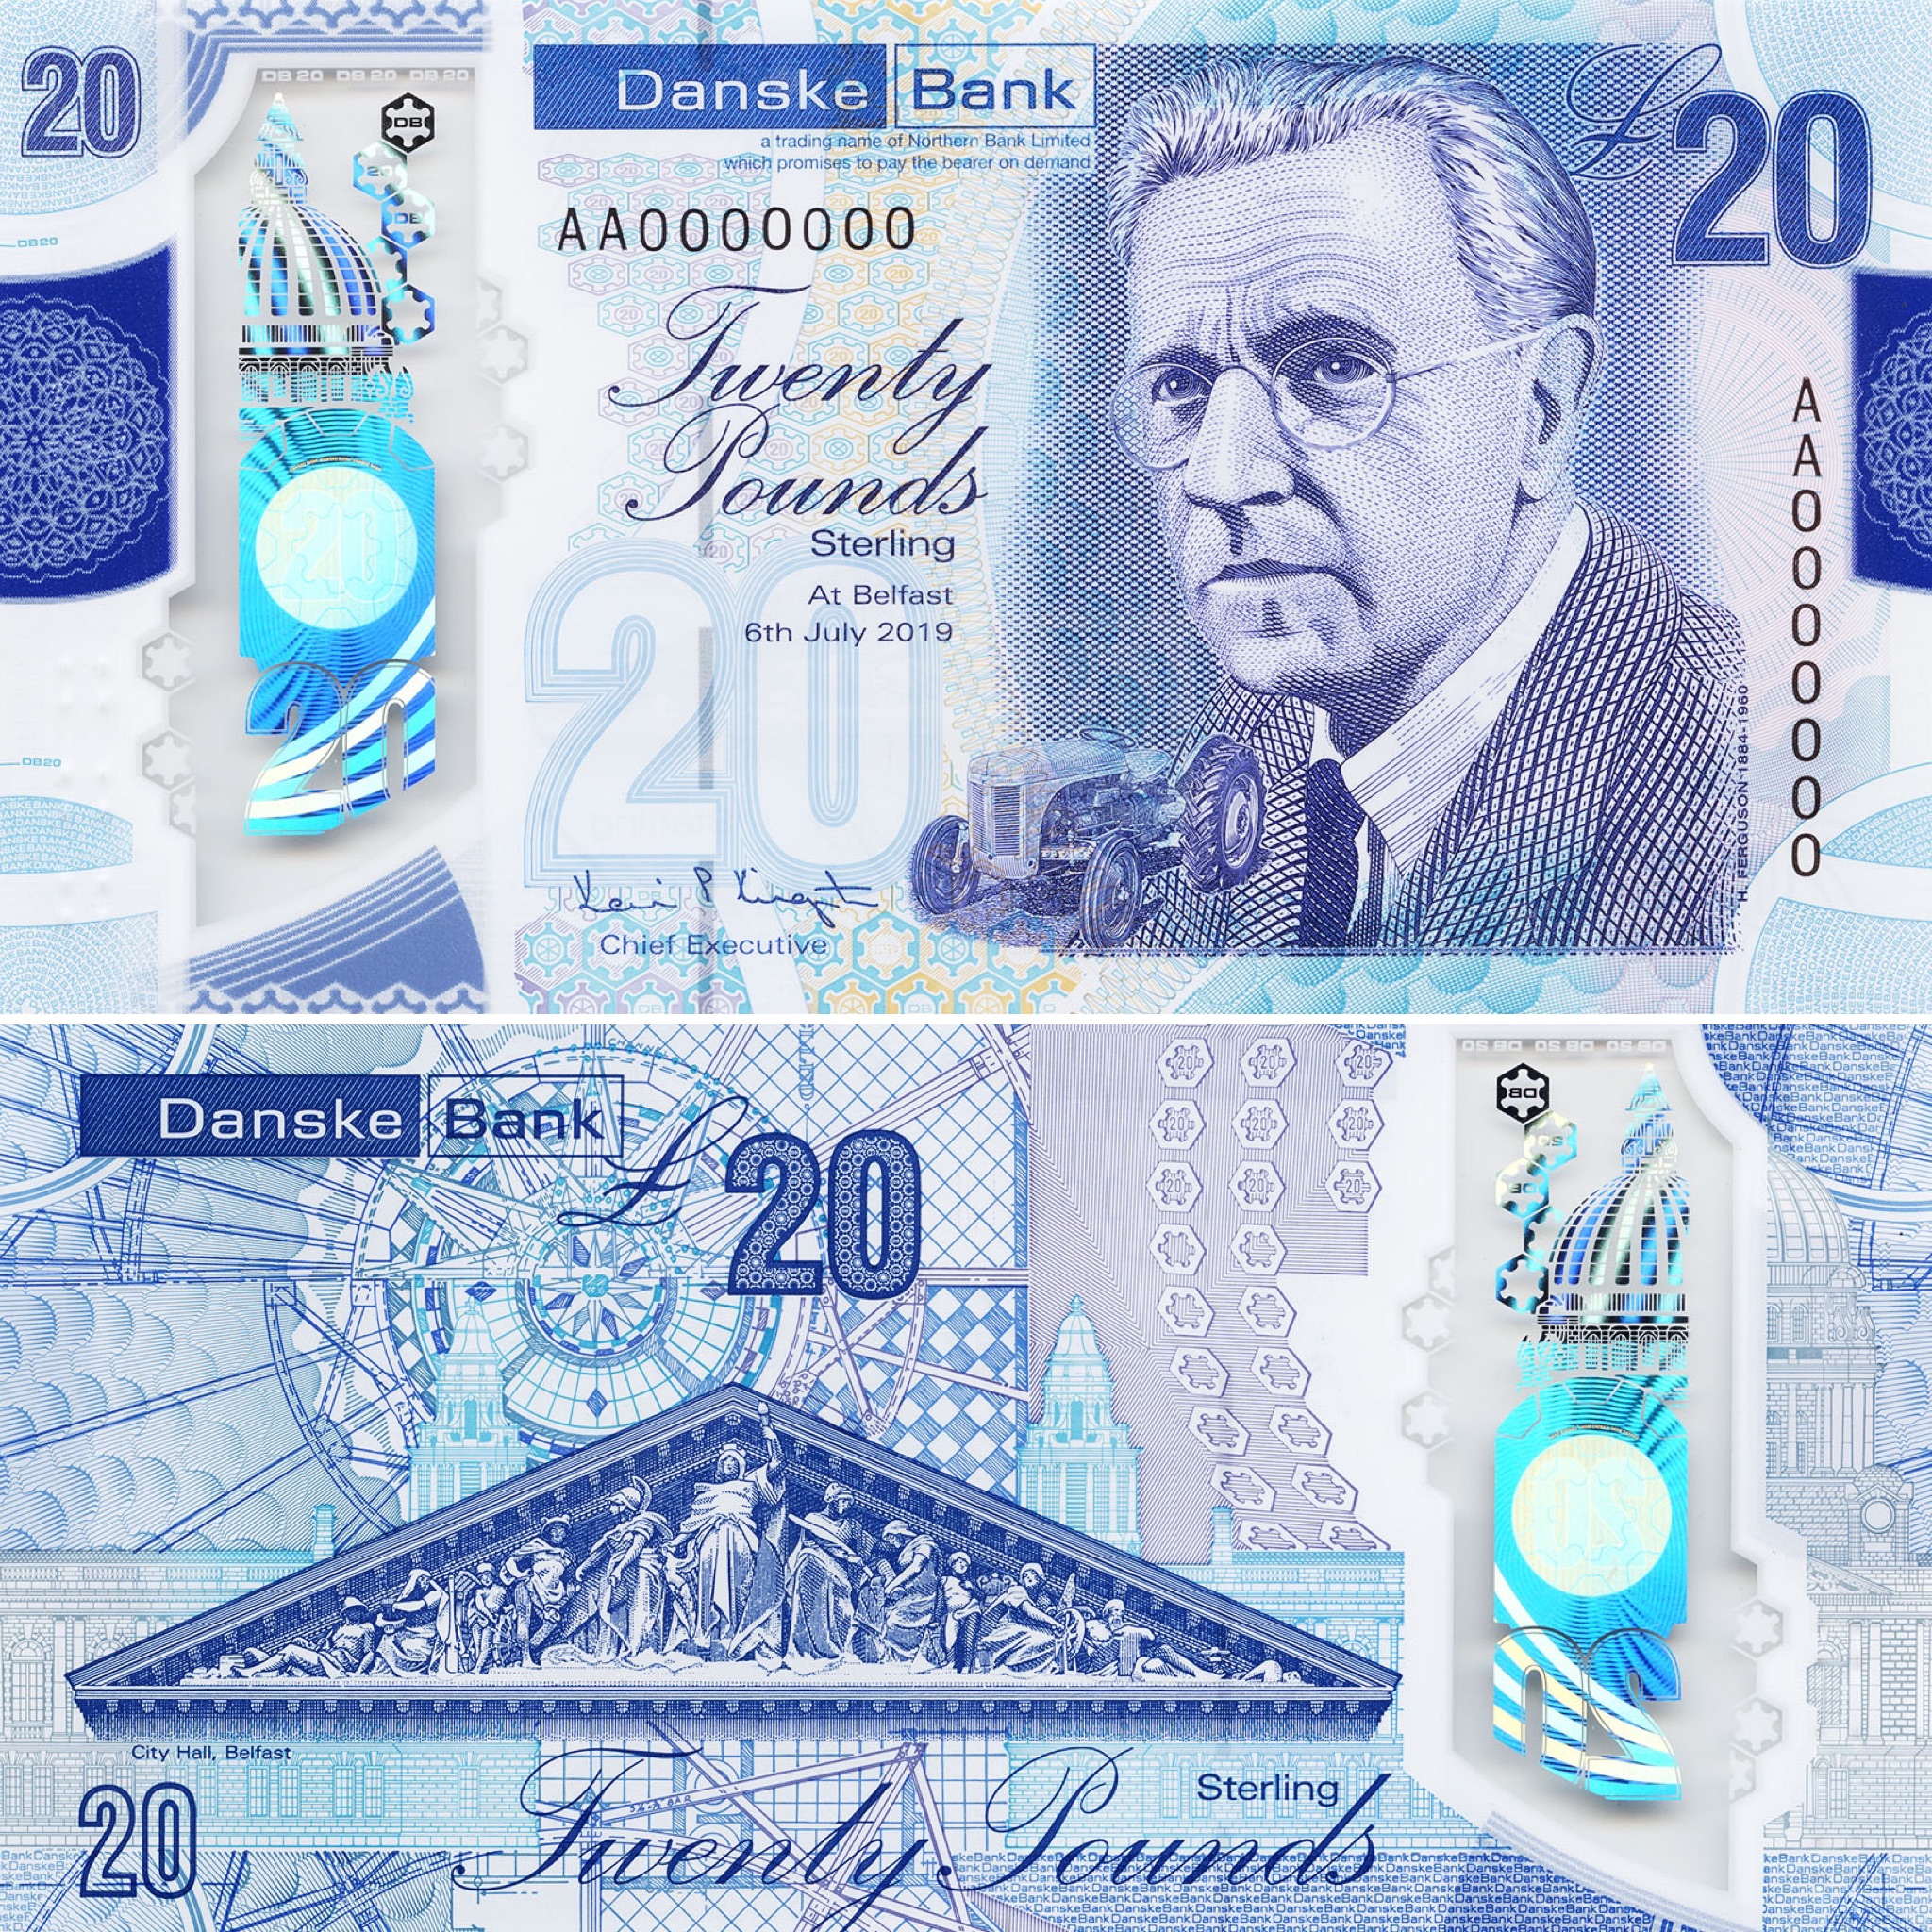 Image showing the front and back of the new Danske Bank £20 polymer note. The note has purple and blue hues, with a portrait of Harry Ferguson on the front with a small tractor and some close ups of Belfast City Hall on the back. 